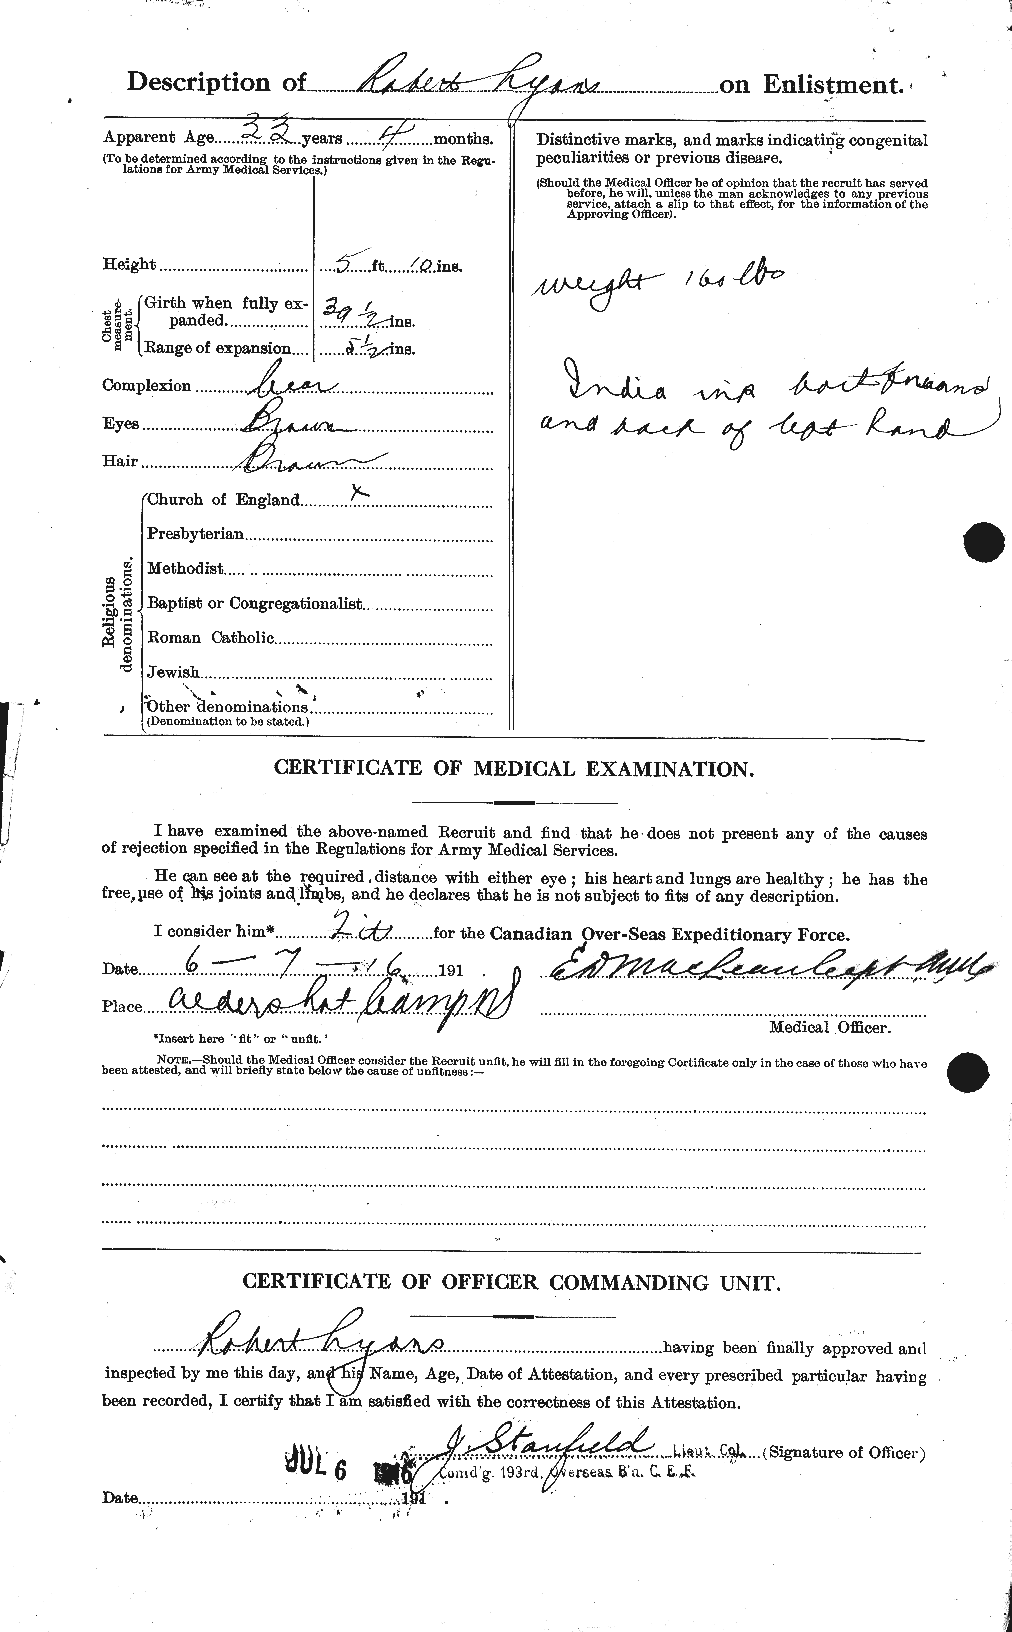 Personnel Records of the First World War - CEF 474846b